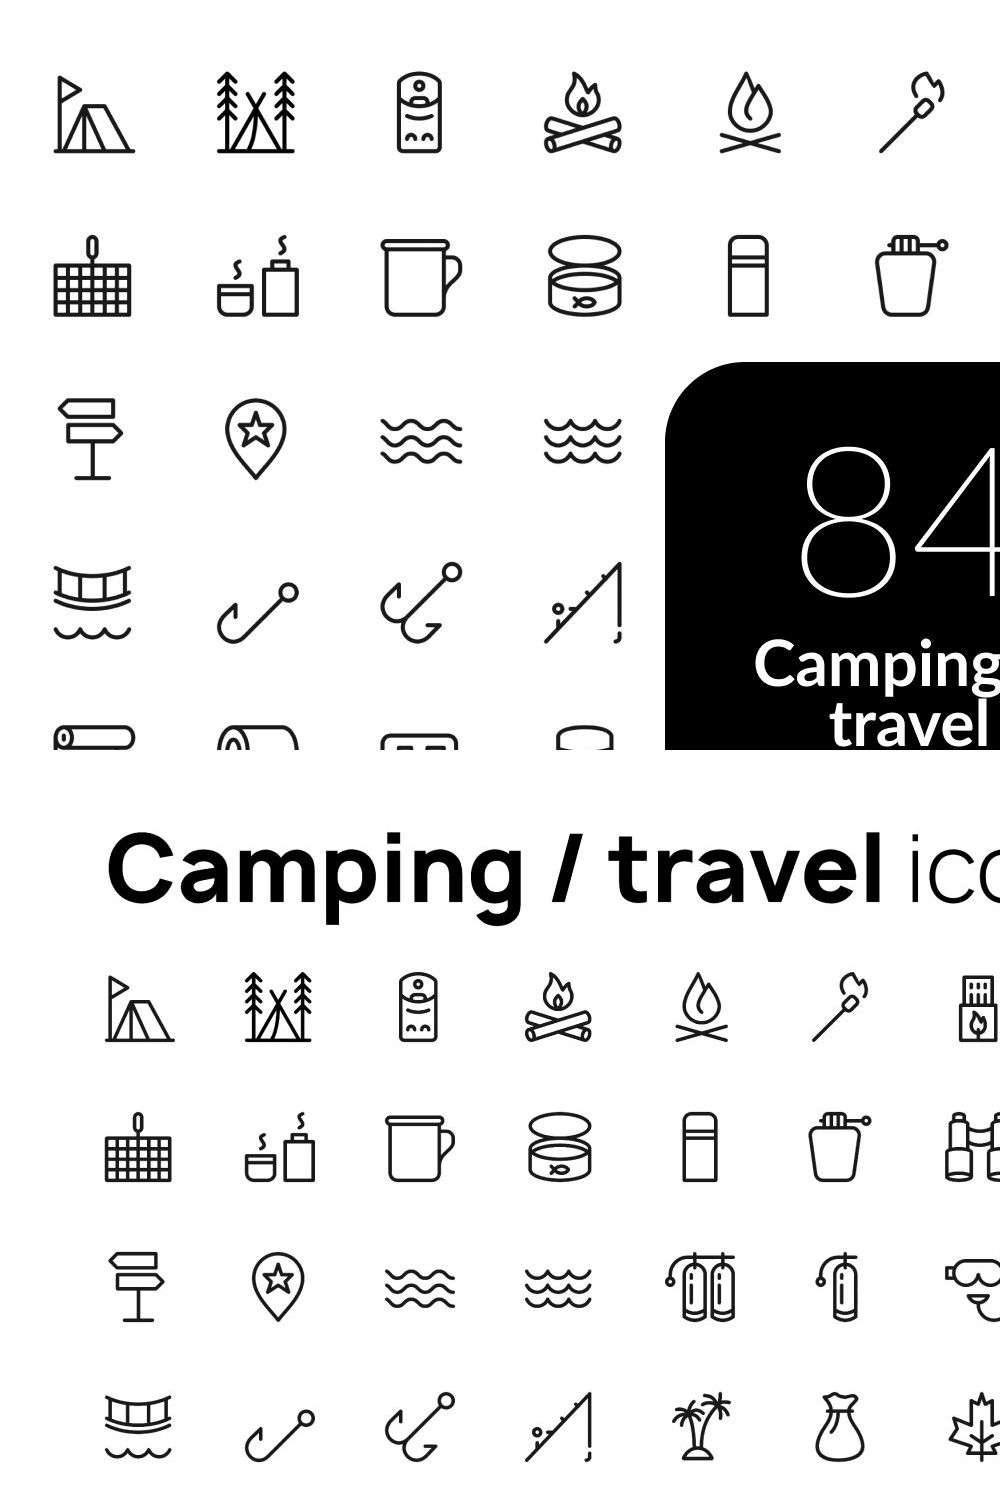 Camping & travel icons pinterest preview image.